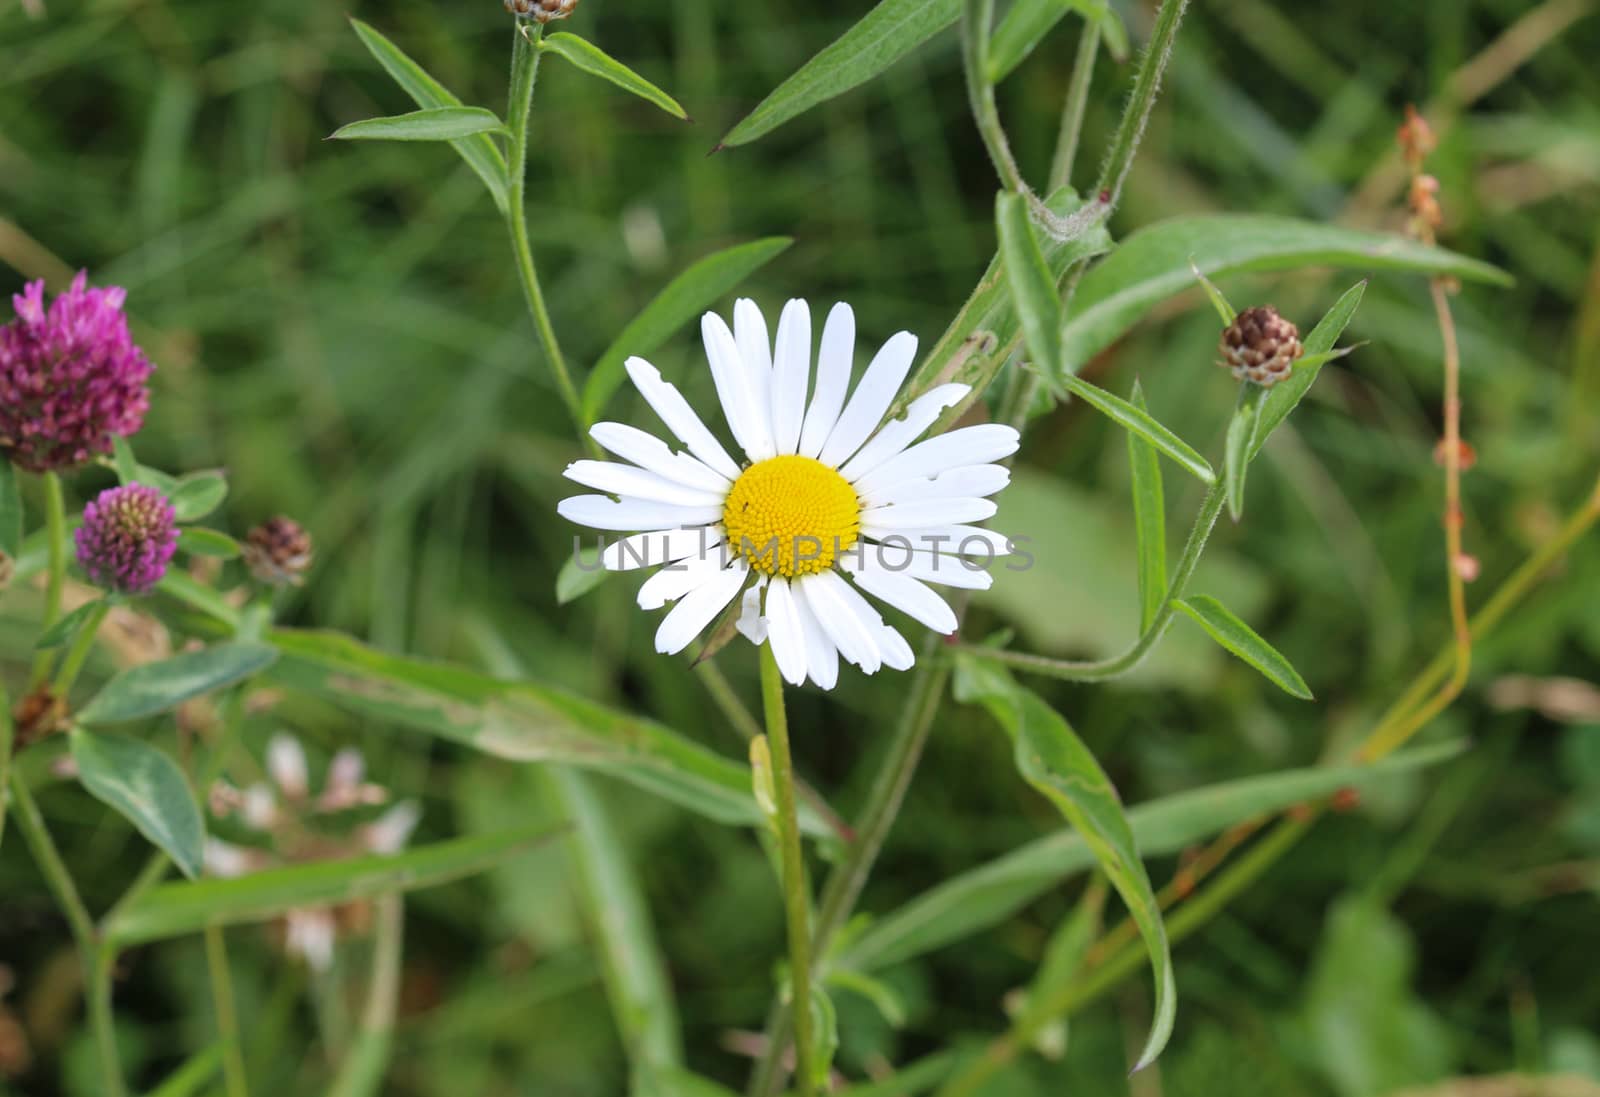 close up of Leucanthemum vulgare, commonly known as the ox-eye daisy, oxeye daisy, dog daisy